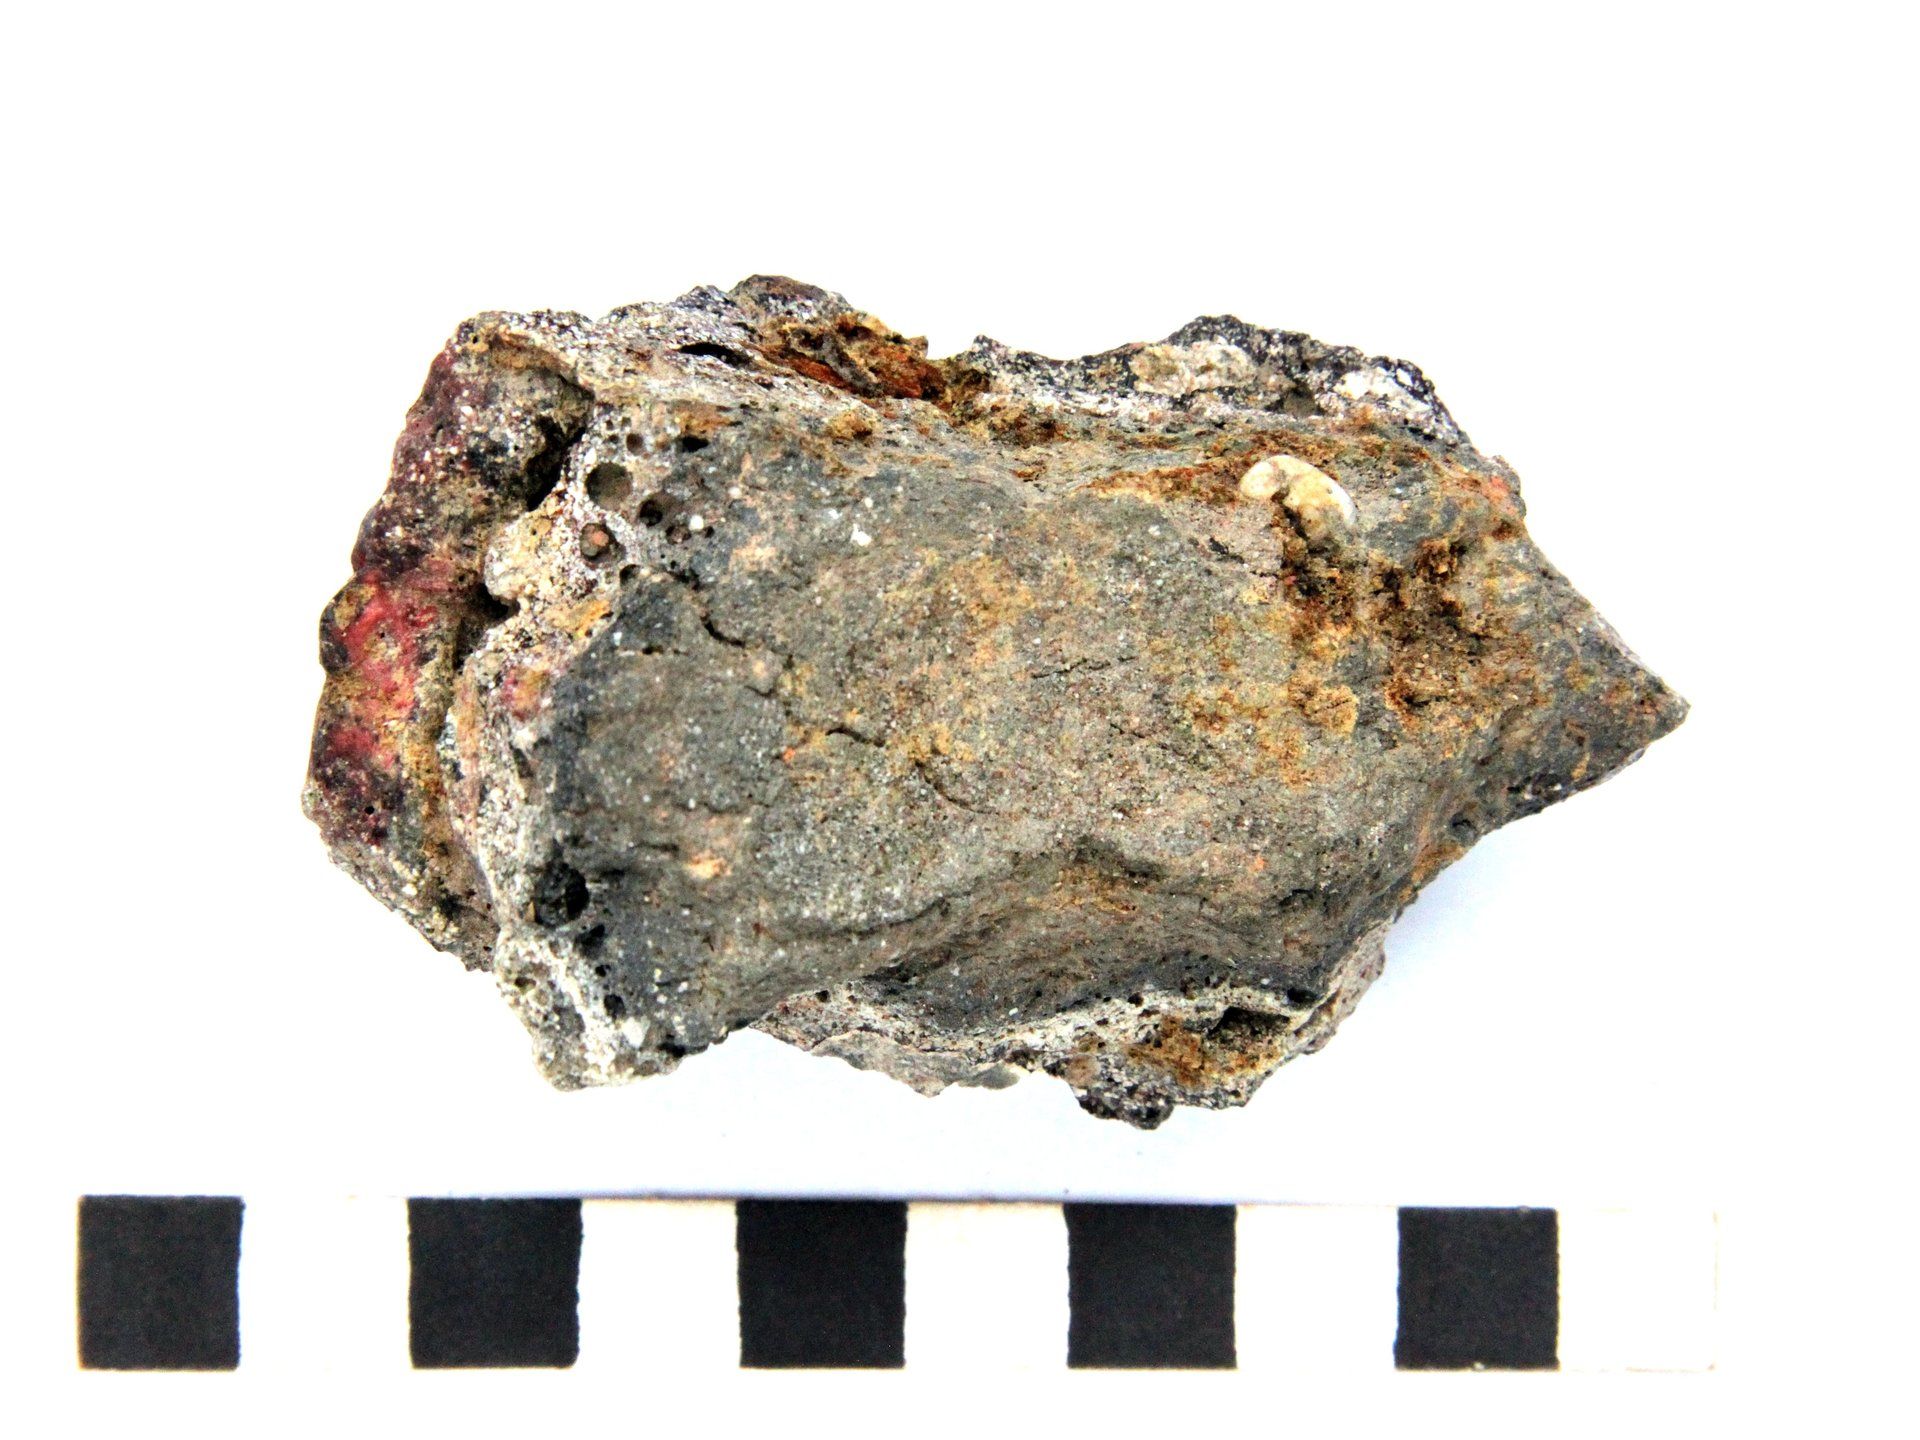 Crucible fragment proving the melting of copper-alloy melting at Nijmegen in the Roman period.